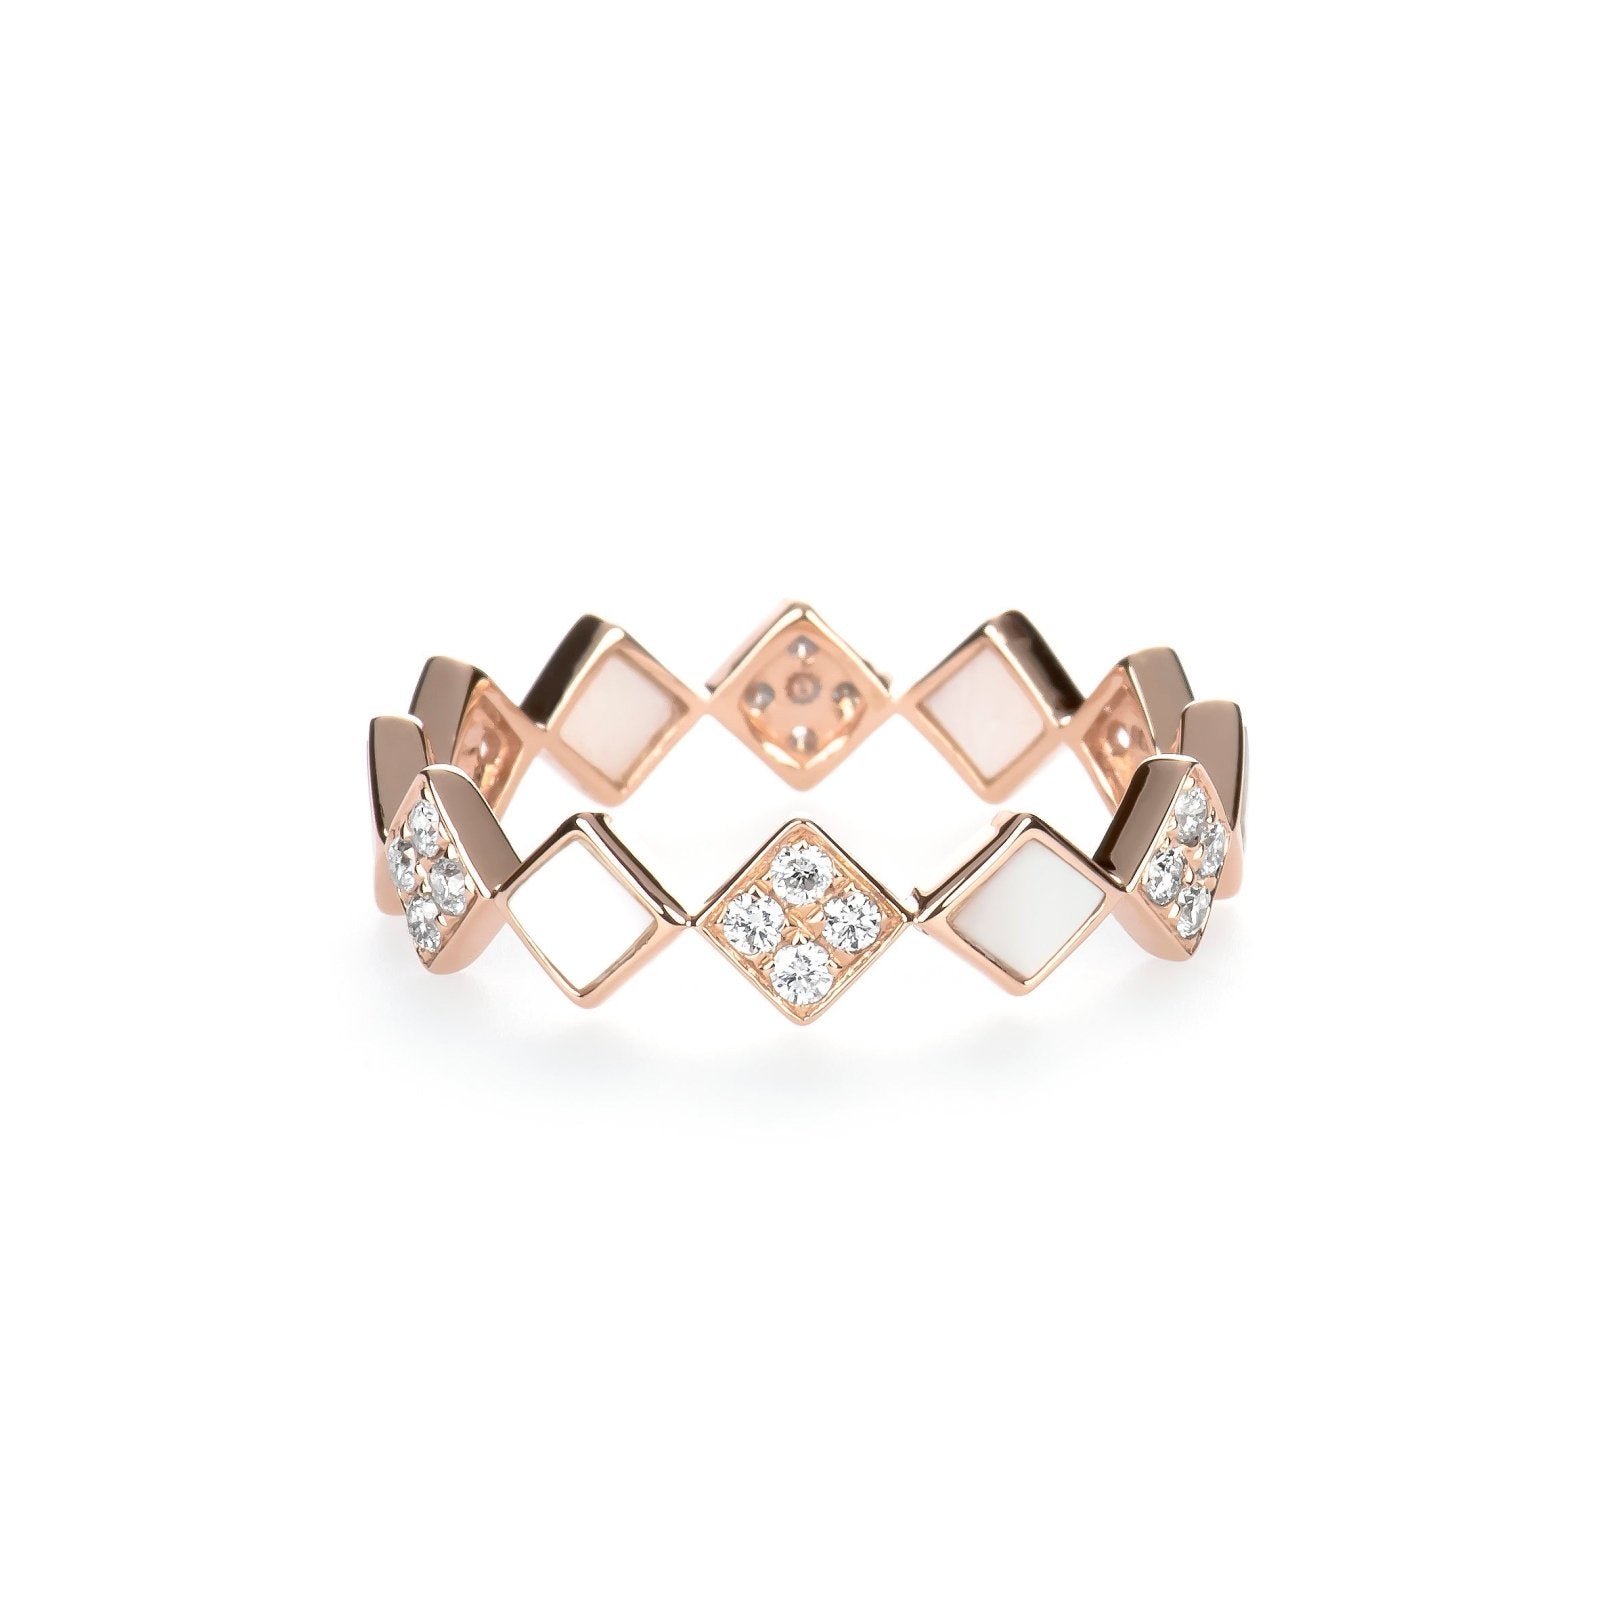 Alternating Diamond and Mother of Pearl Eternity Ring Rings Estella Collection 17205 14k Band Birthstone #tag4# #tag5# #tag6# #tag7# #tag8# #tag9# #tag10# 7 14K Rose Gold